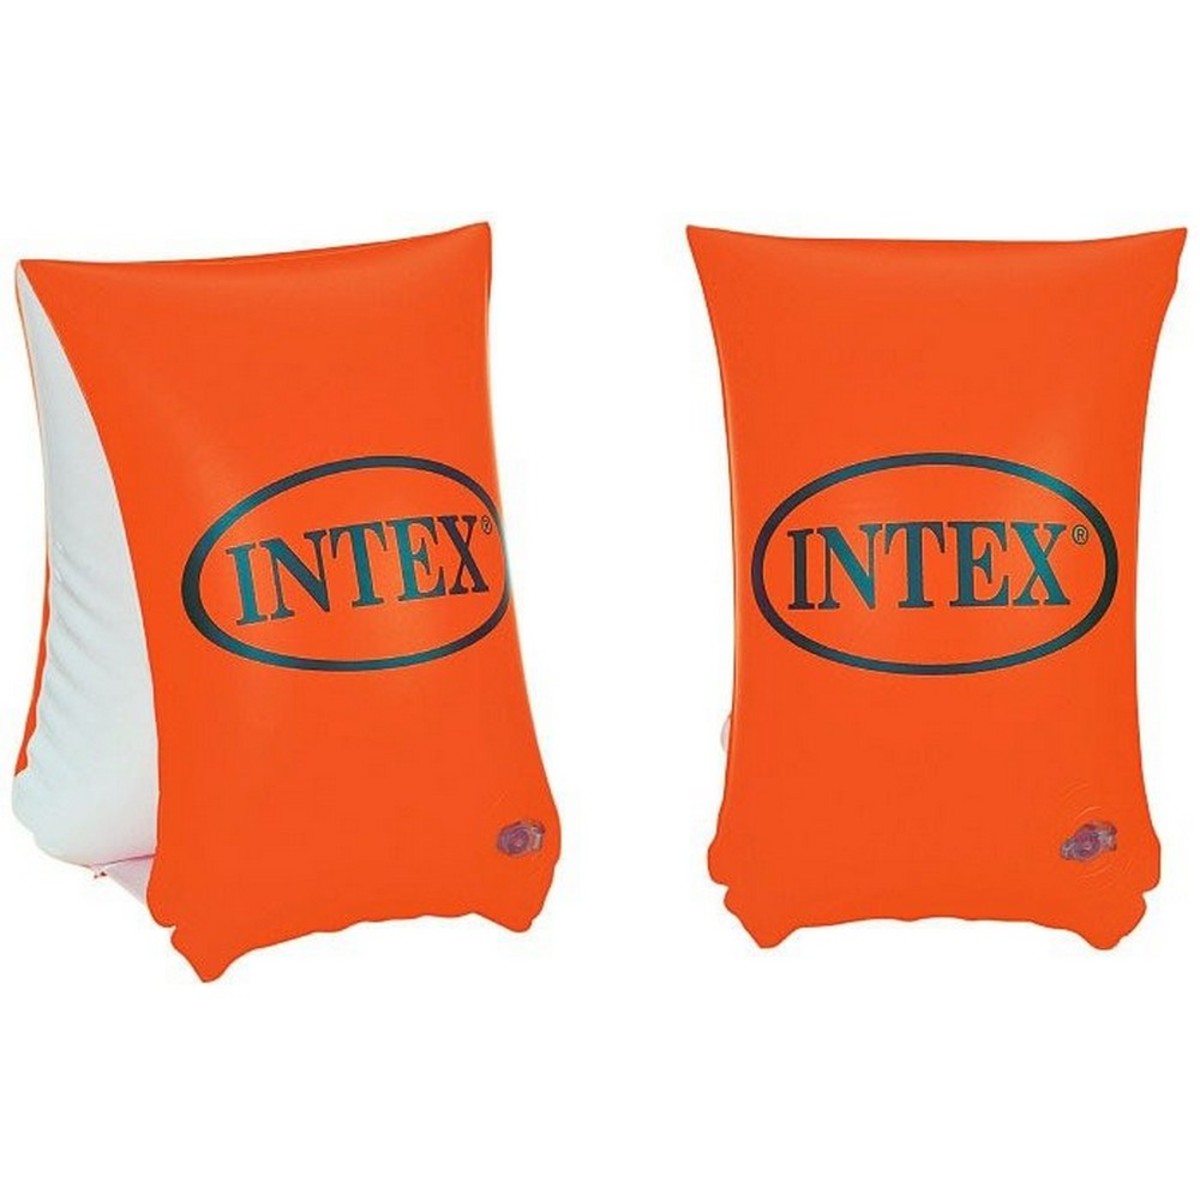 Intex Large Deluxe Arm Band 58641